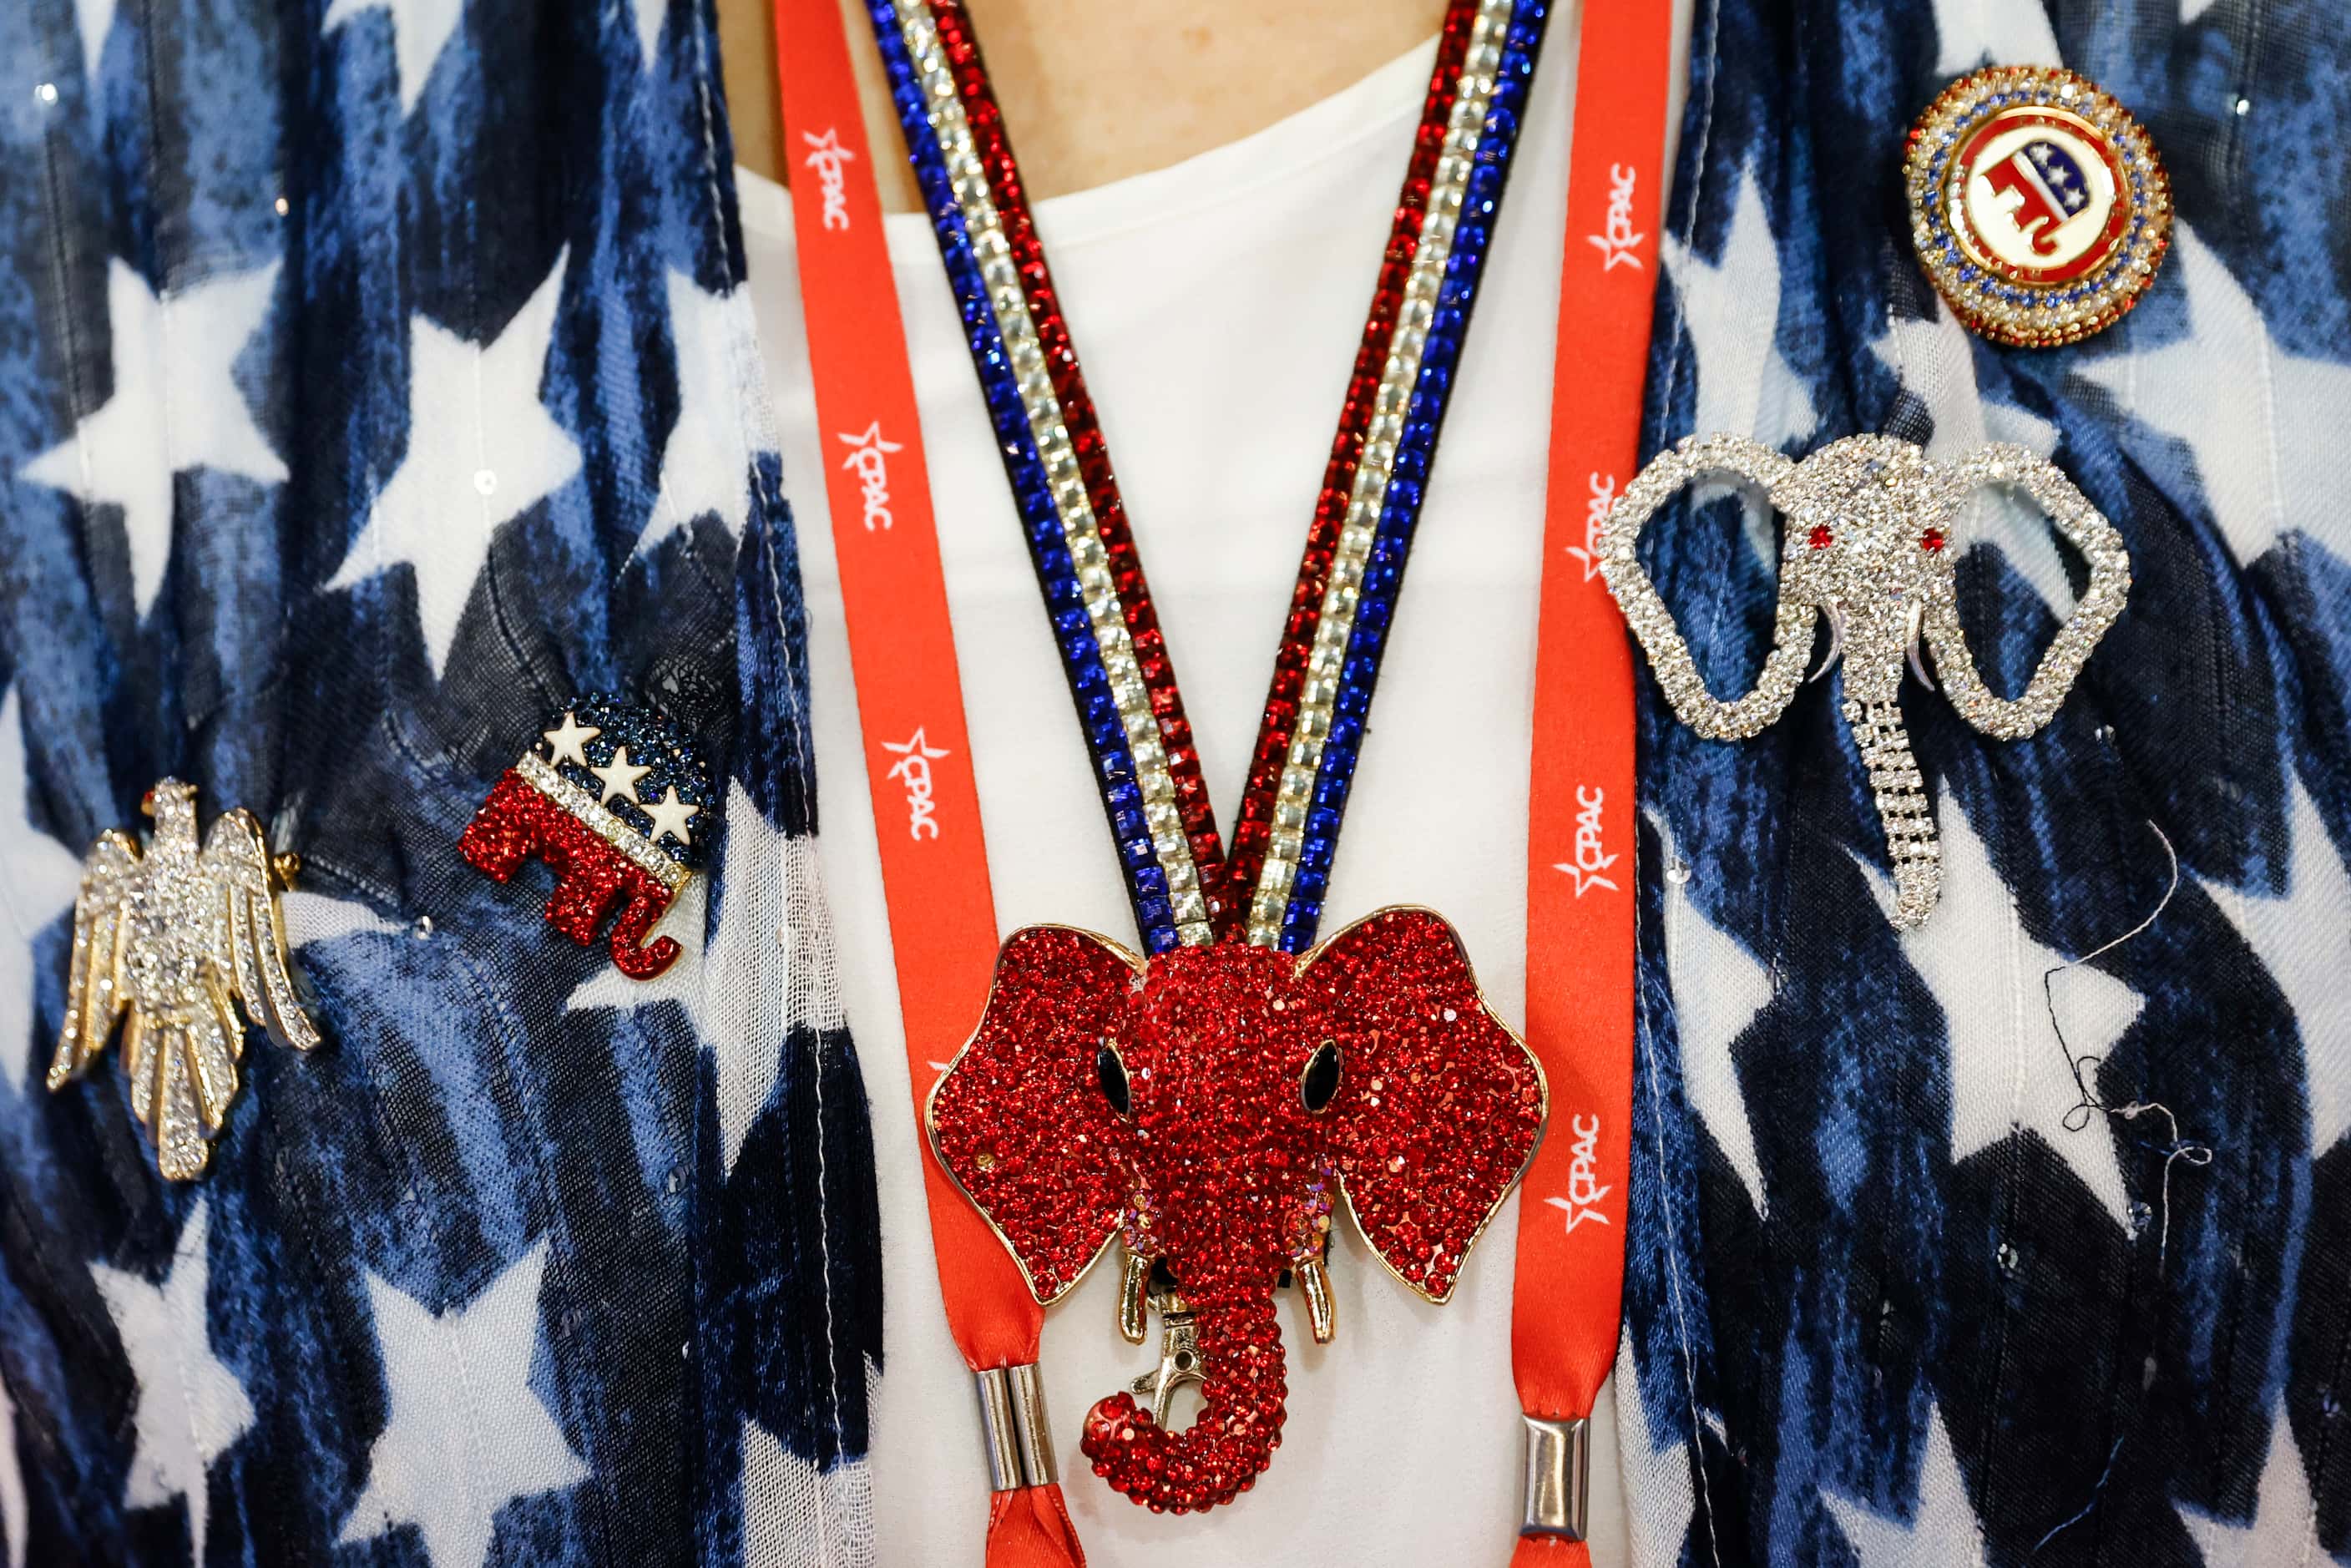 Ornaments hang on the attire of attendee Dottie Layman during the third day of Conservative...